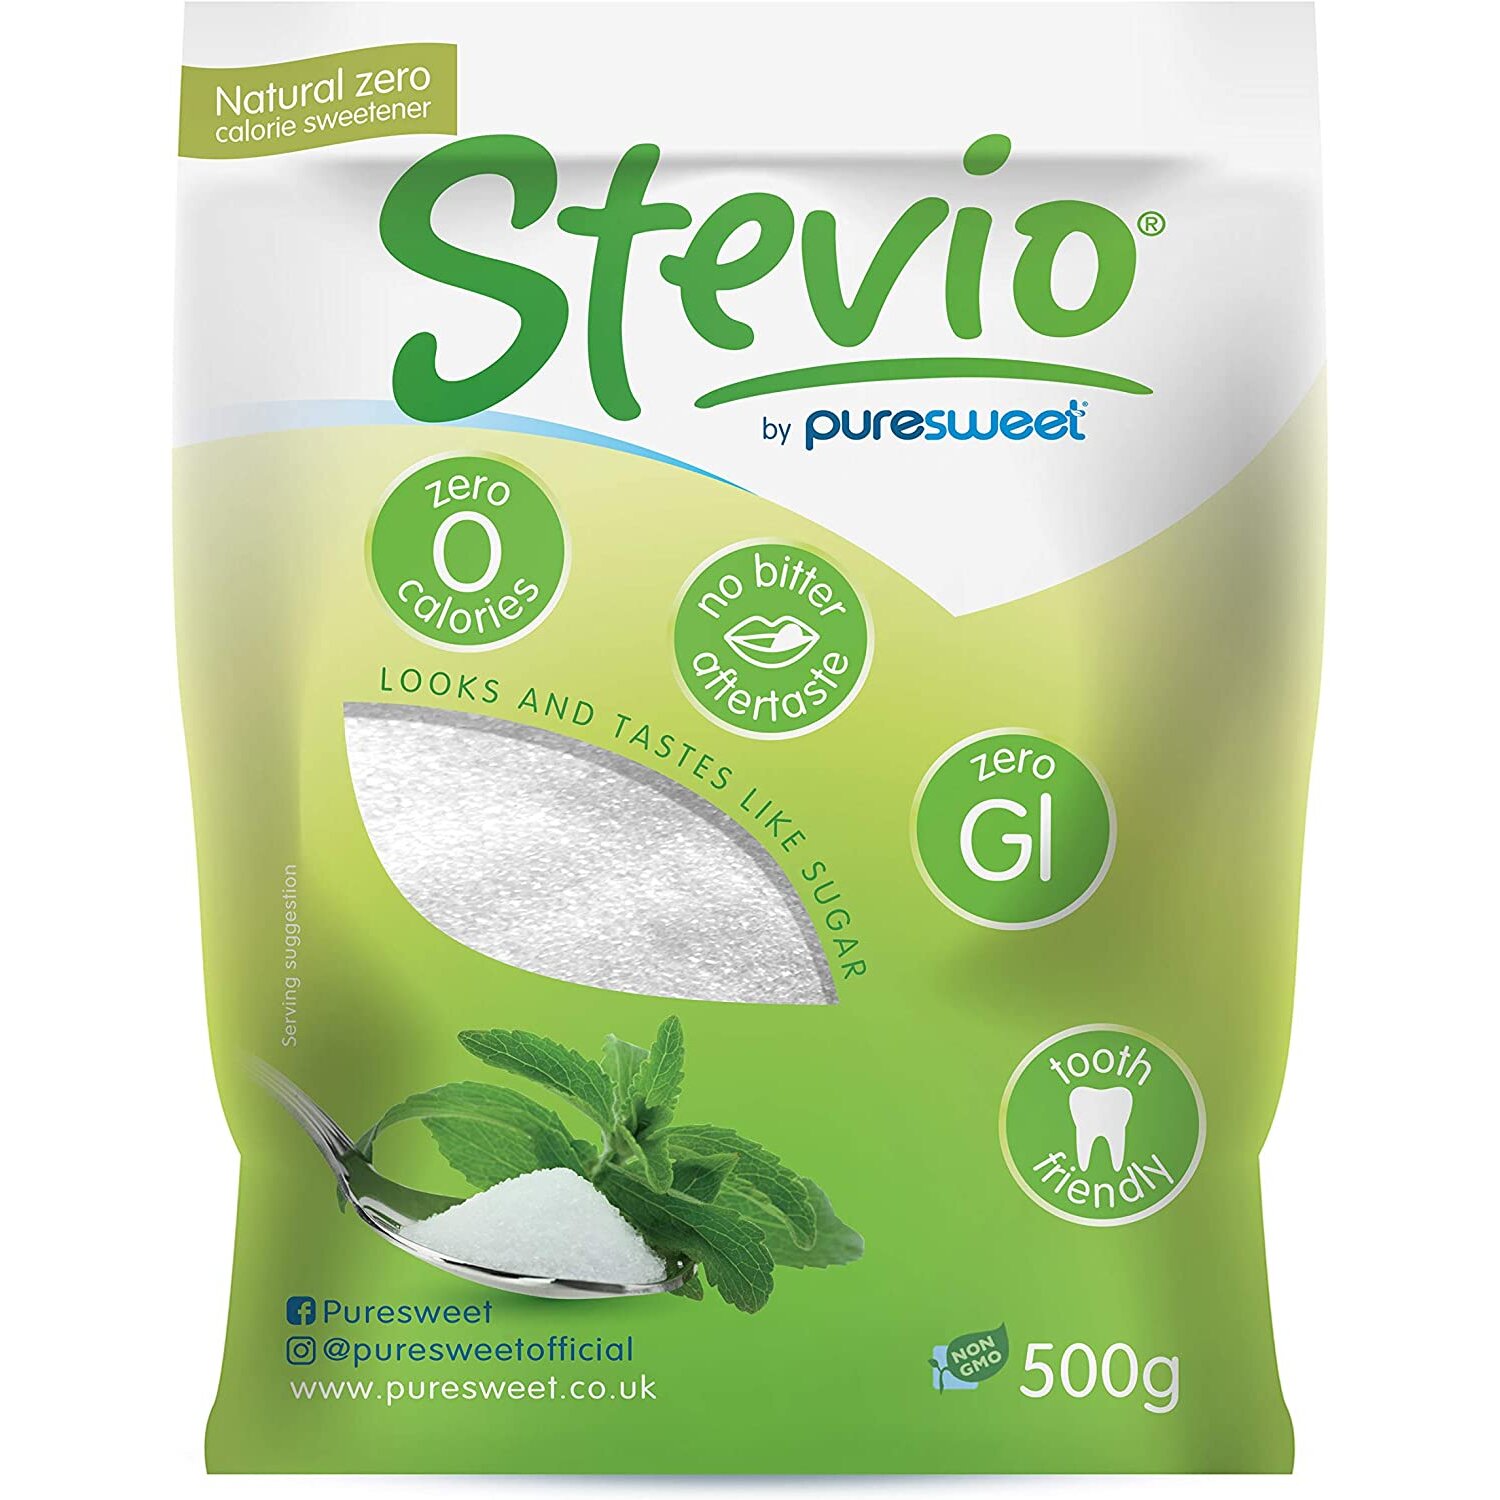 Puresweet Stevio Premium Stevia Sweetener, Tastes Like Sugar, Diabetic Friendly, No Bitter Aftertaste, Spoon for Spoon, Resealable and Recyclable